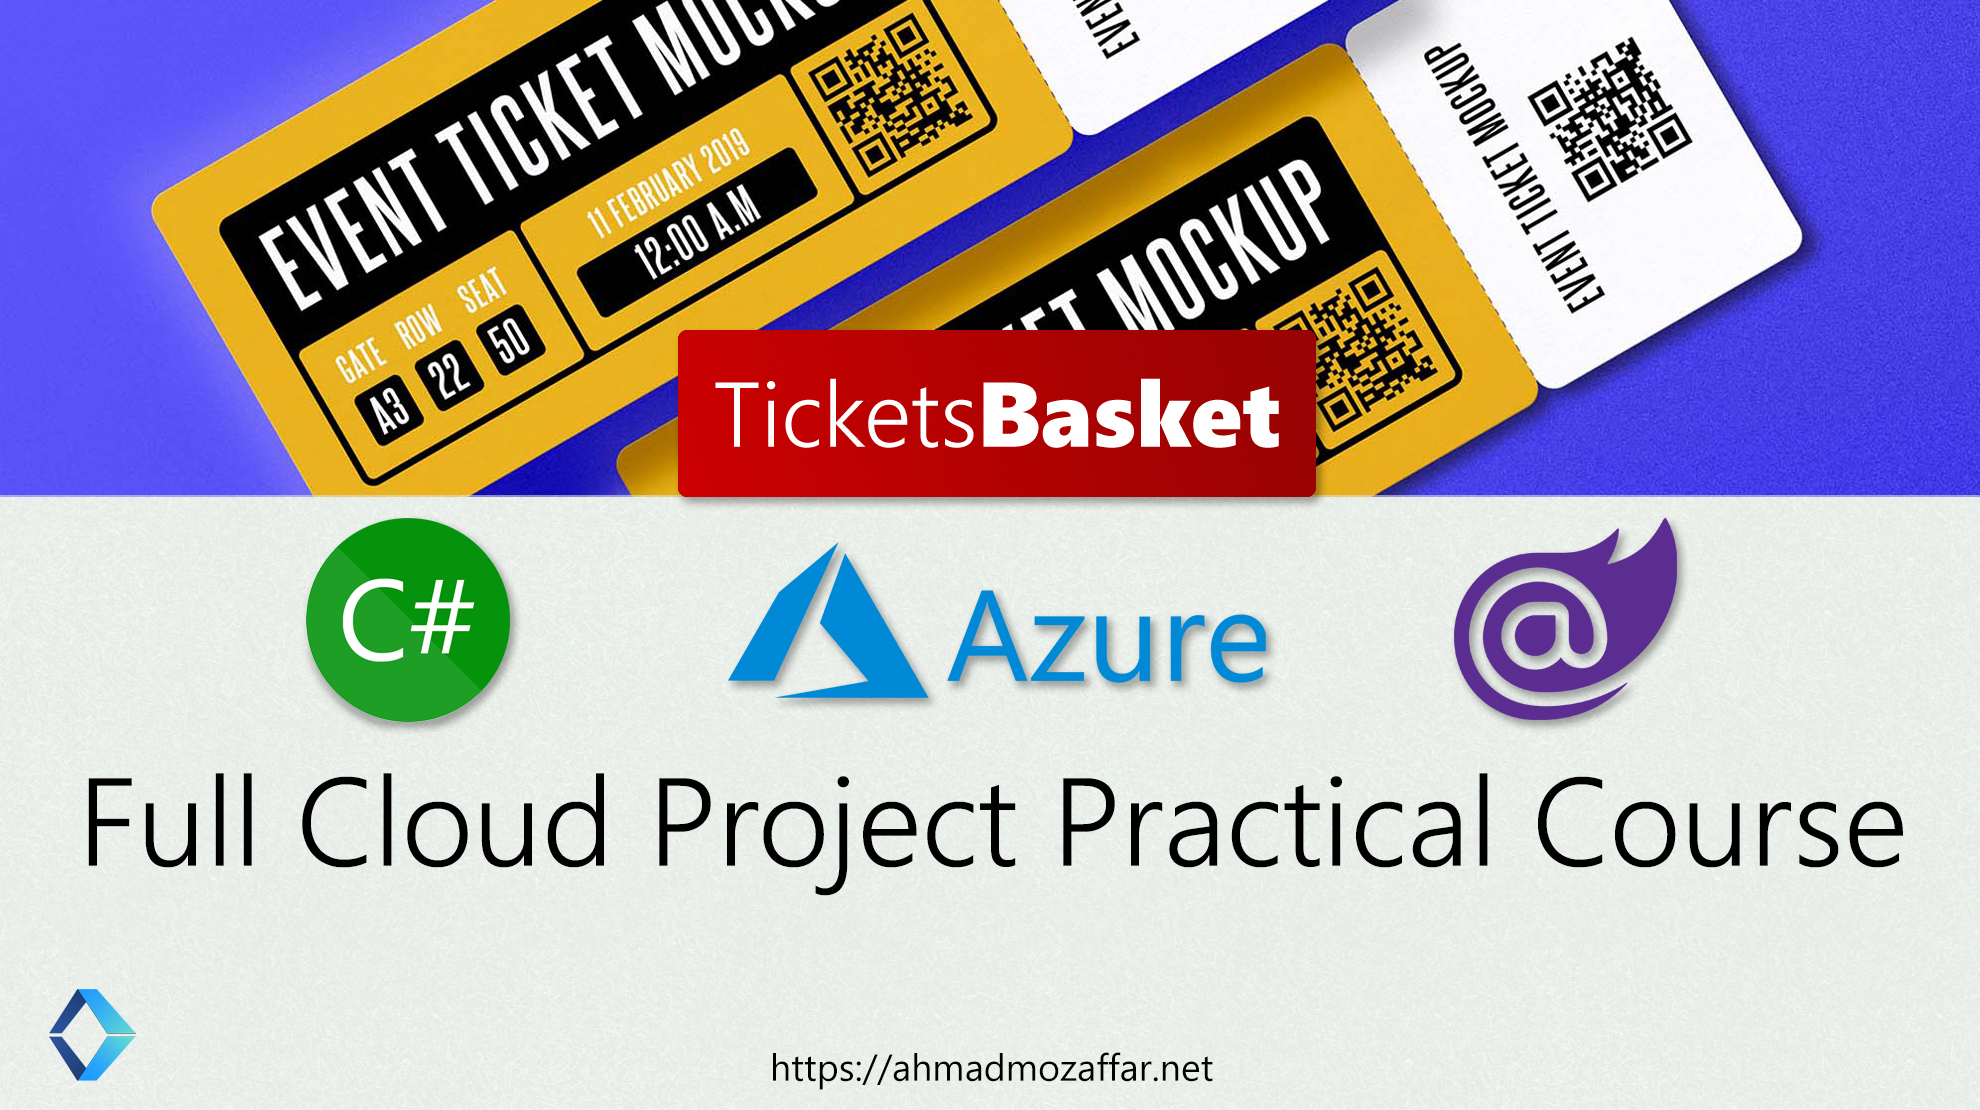 TicketsBasket | Full Cloud Project Practical Course with Azure and .NET Core